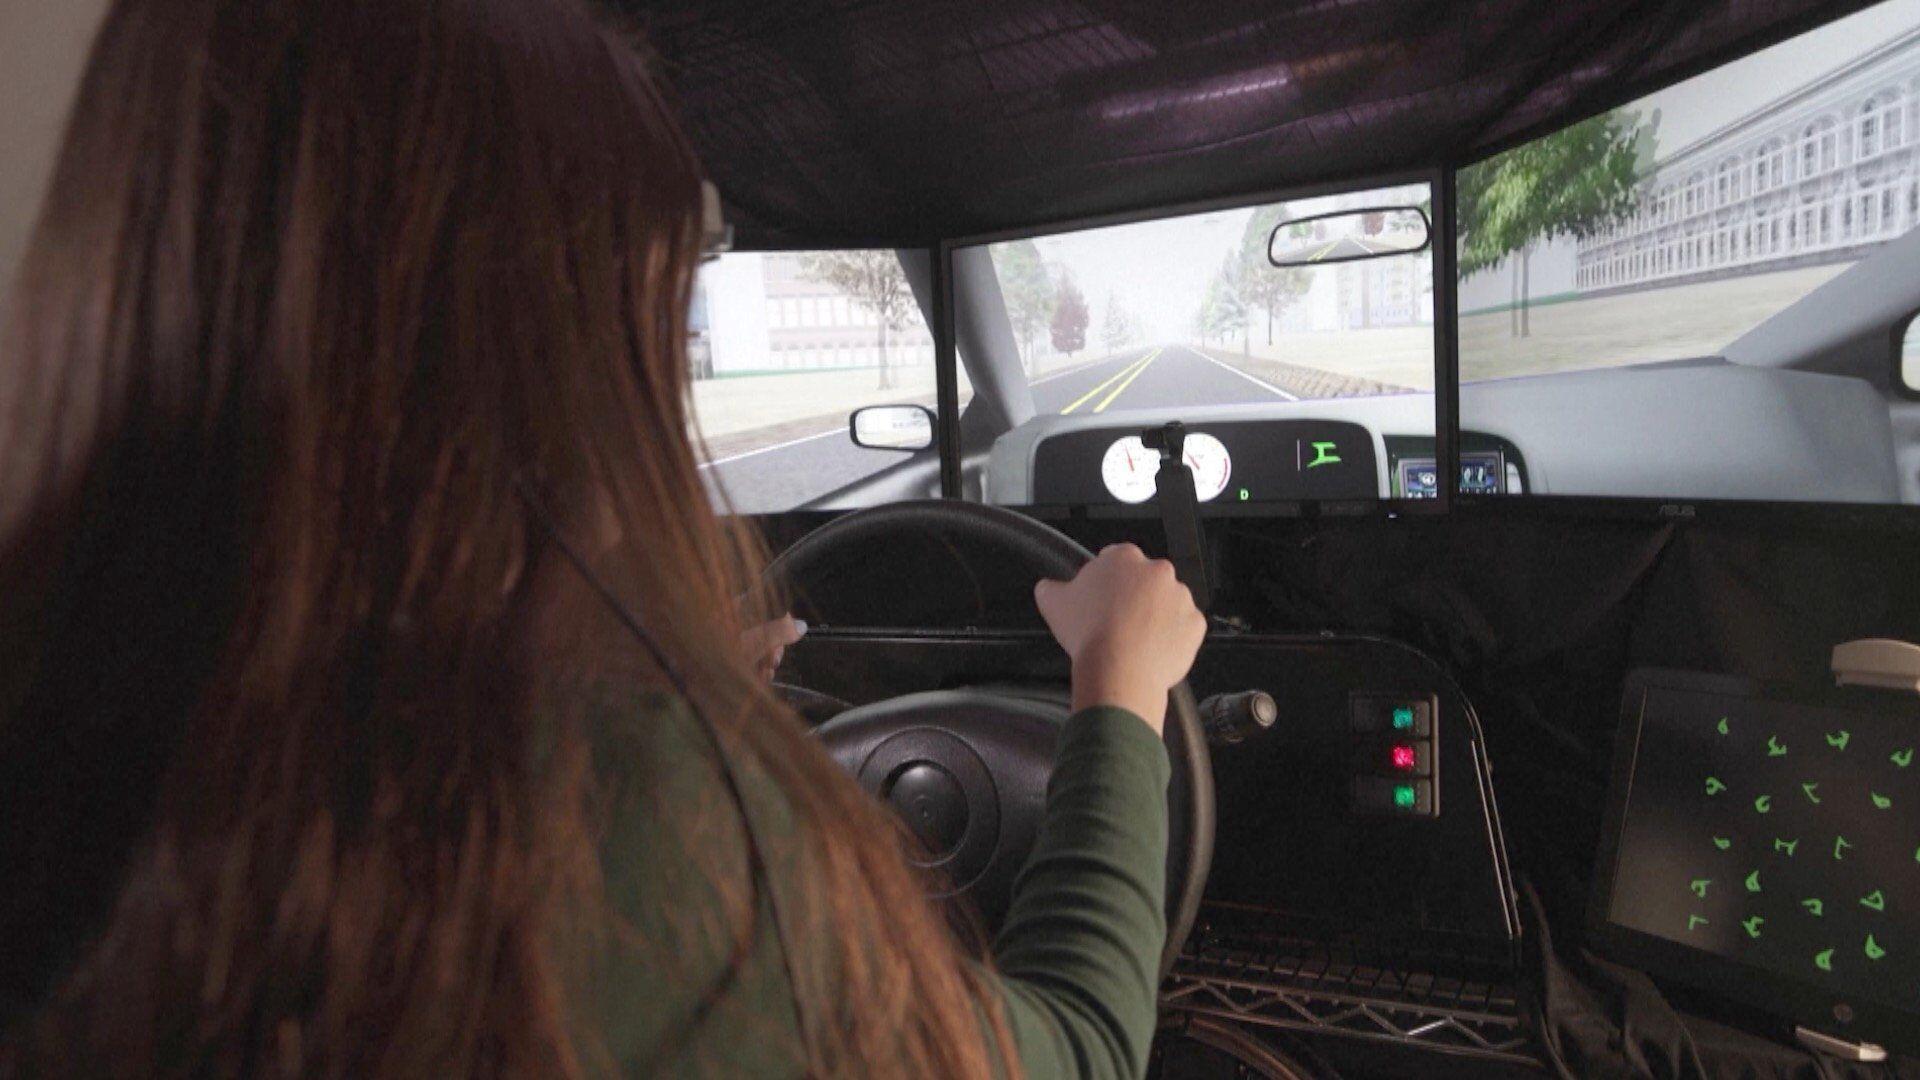 Driving simulator could help reduce car accidents for teens with ADHD